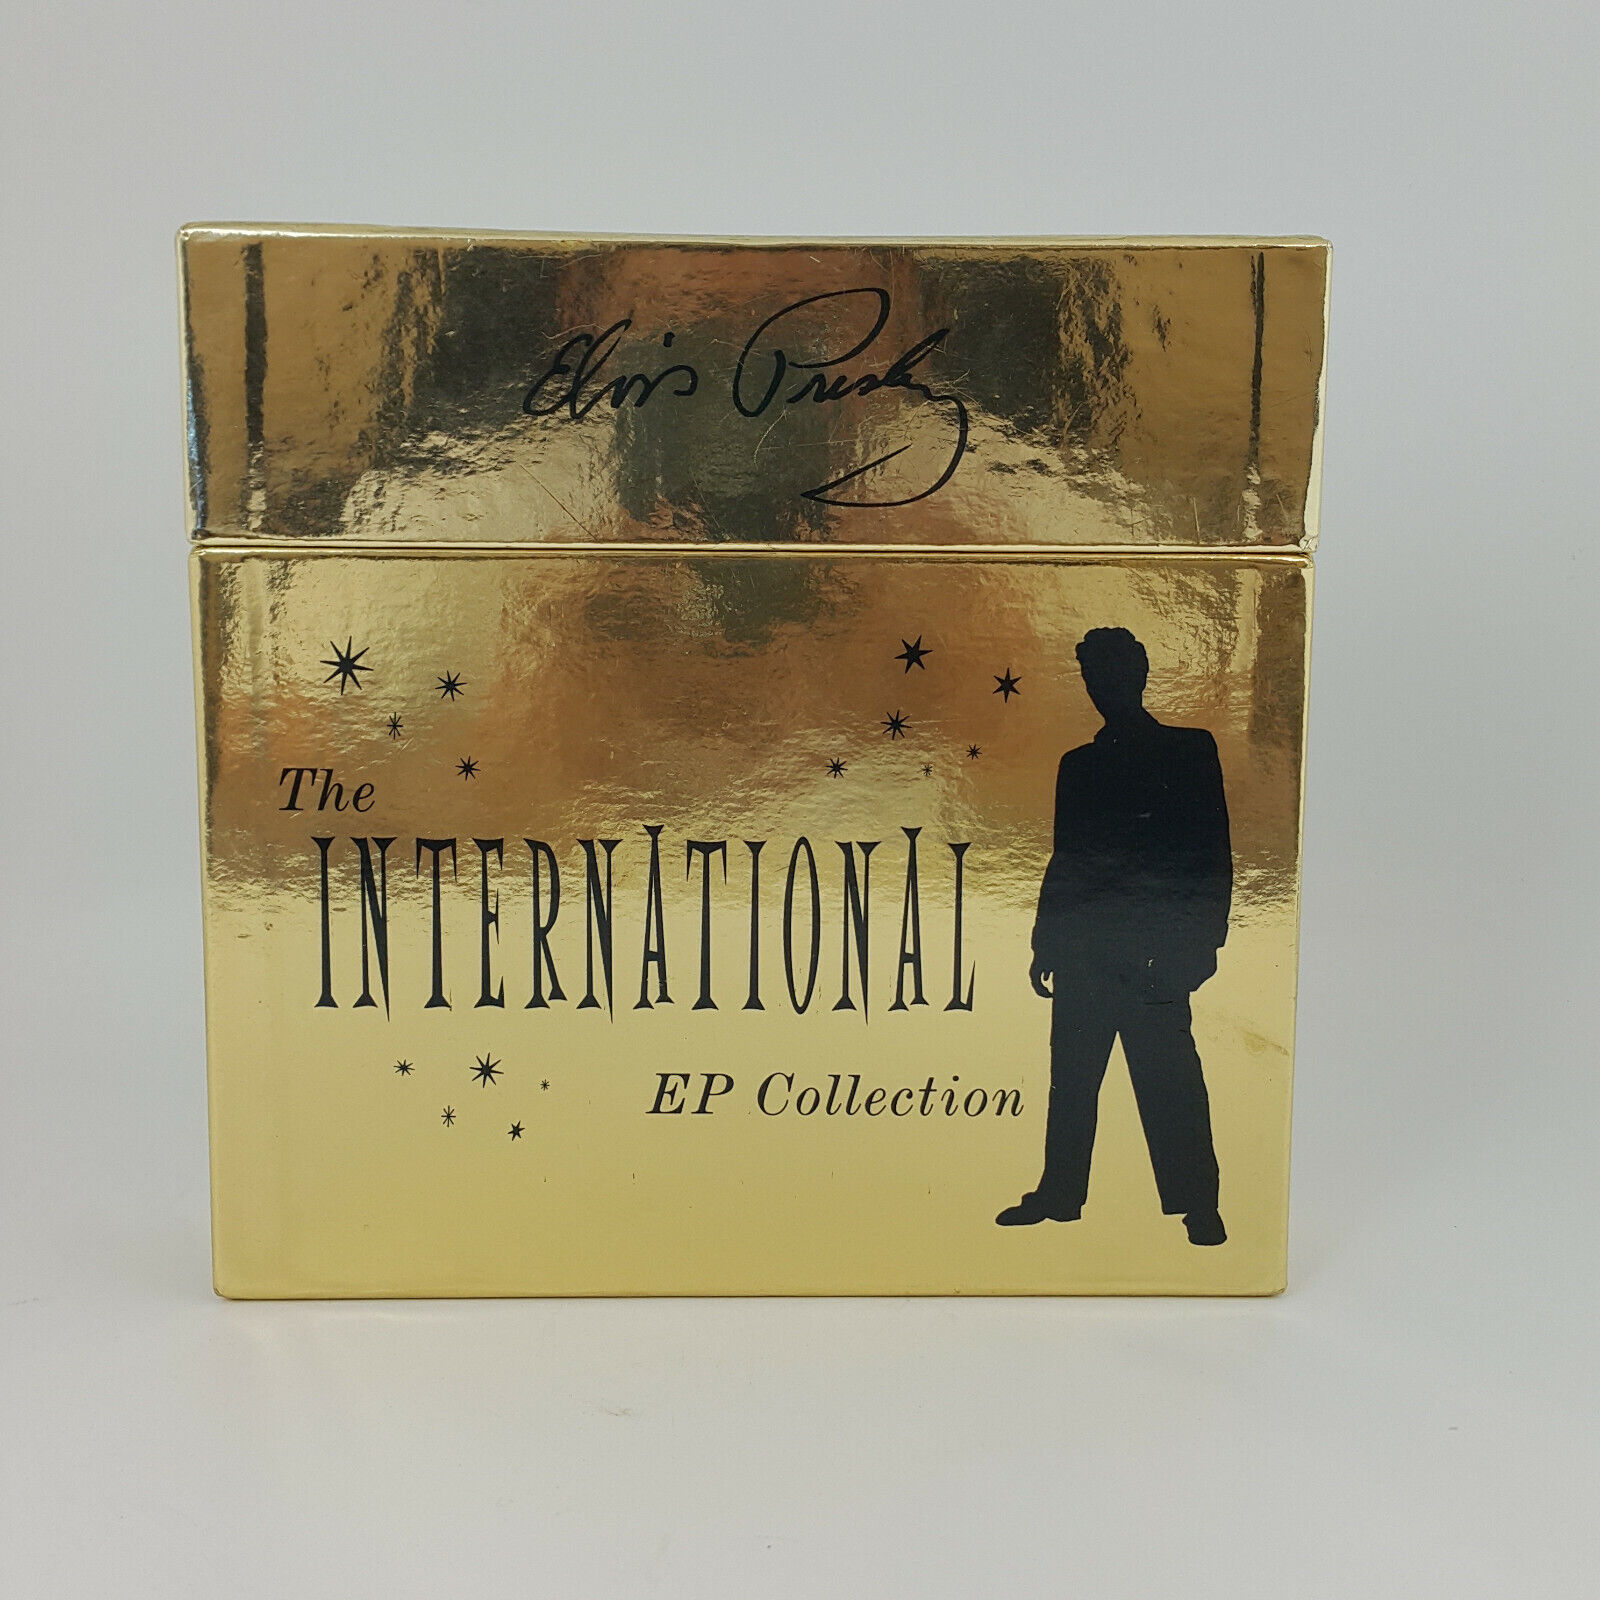 Elvis Presley - The International EP Collection (11 Records) 0127 OA